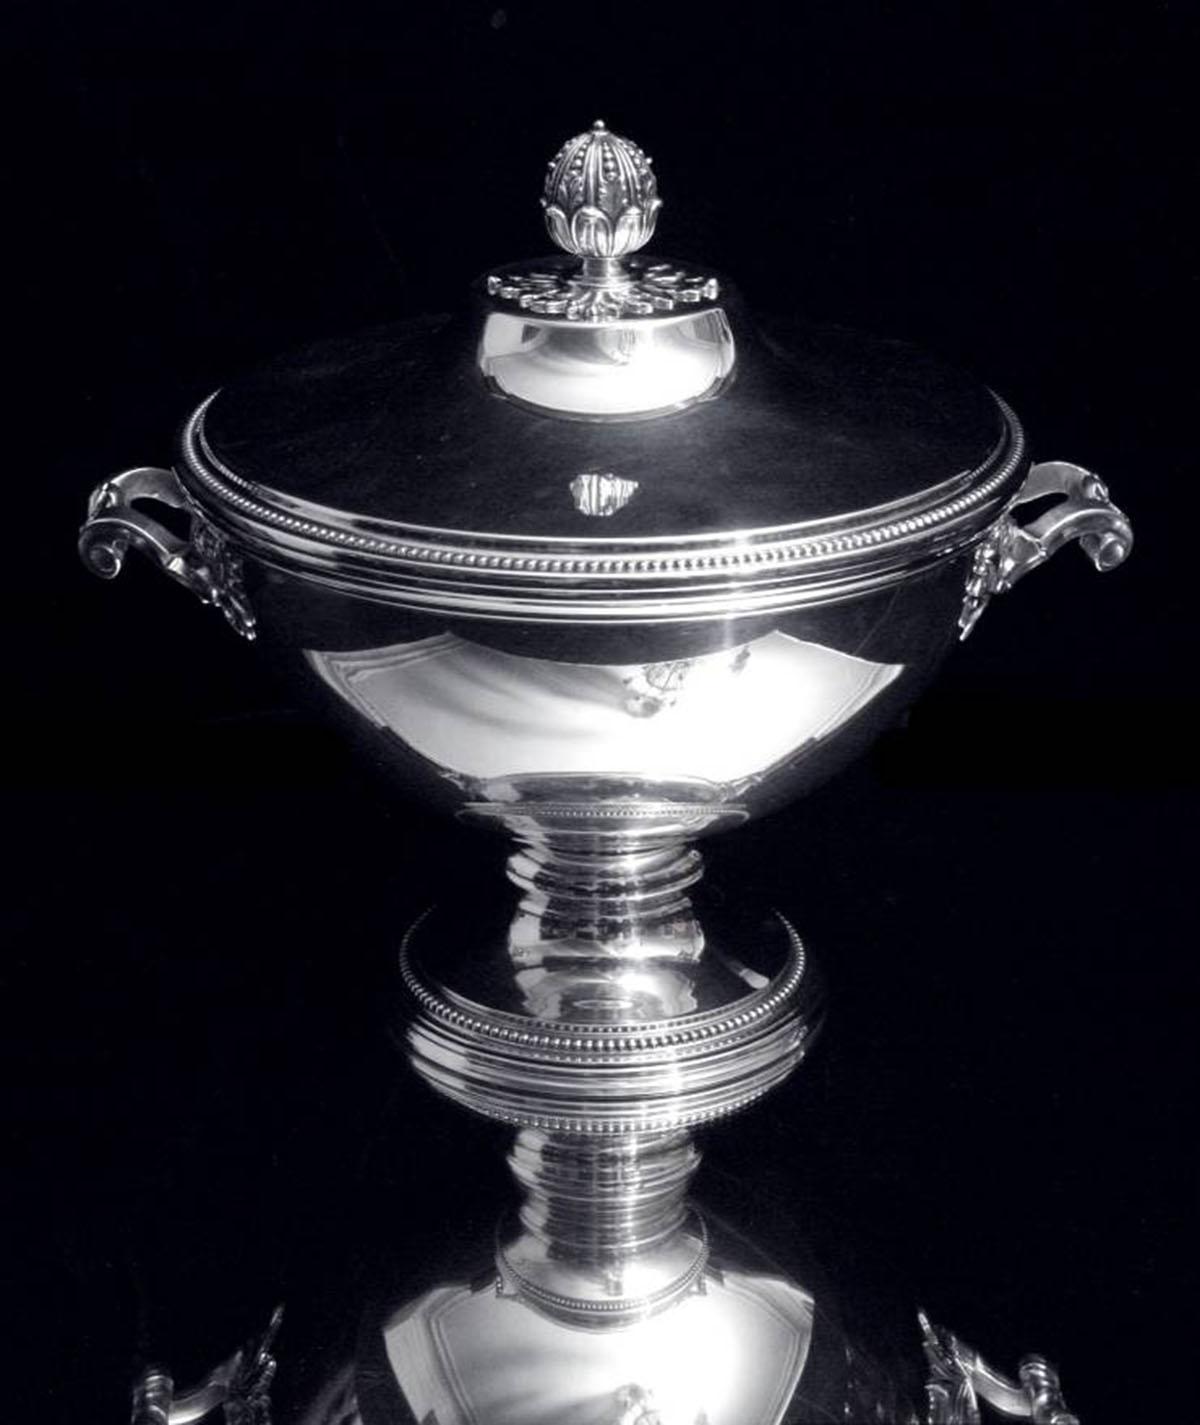 Direct from Paris, a truly magnificent, 19th century, 2-piece covered French 950 sterling silver vegetable server (tureen) by one of France’s premier silversmiths “Tetard Freres”, circa 1880s. Tetard Frères stands as an emblem of unparalleled